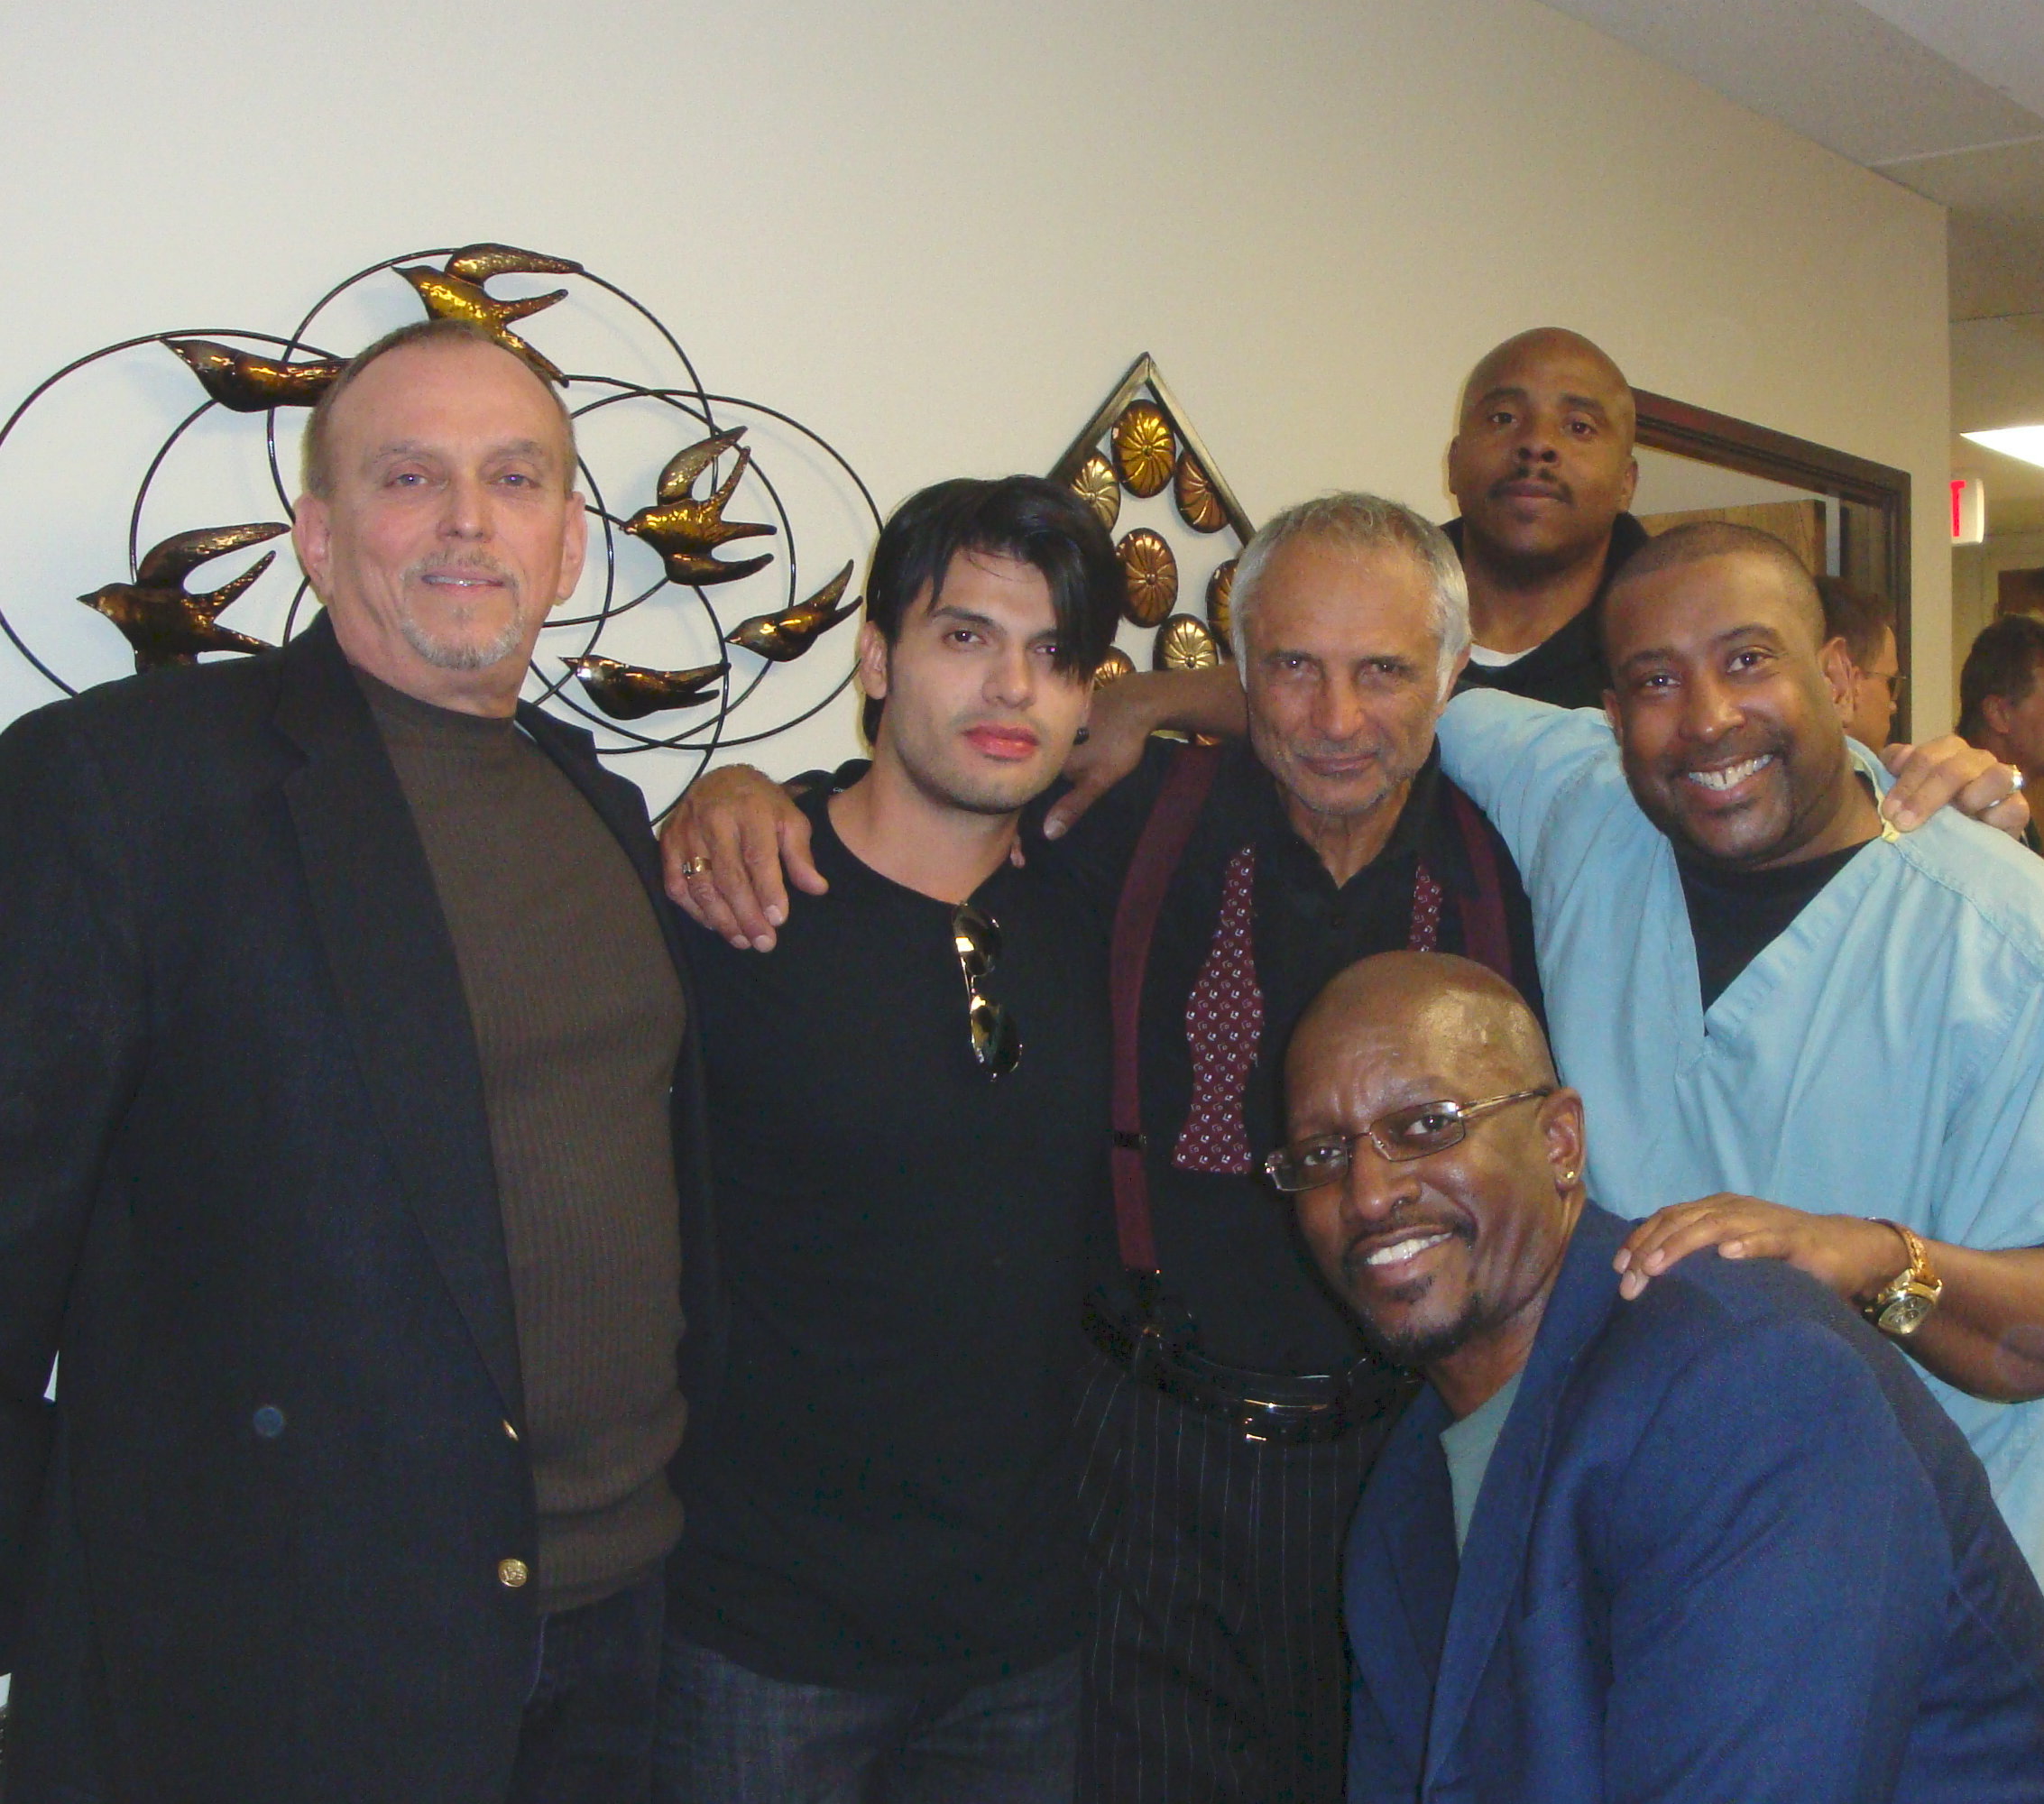 On the Detroit set of the thriller Locked In a Room are Al El, Anthony Hornus, Emerson Rogers Jr., Carlucci Weyant, Robert Miano and Jean-Claude Lewis.